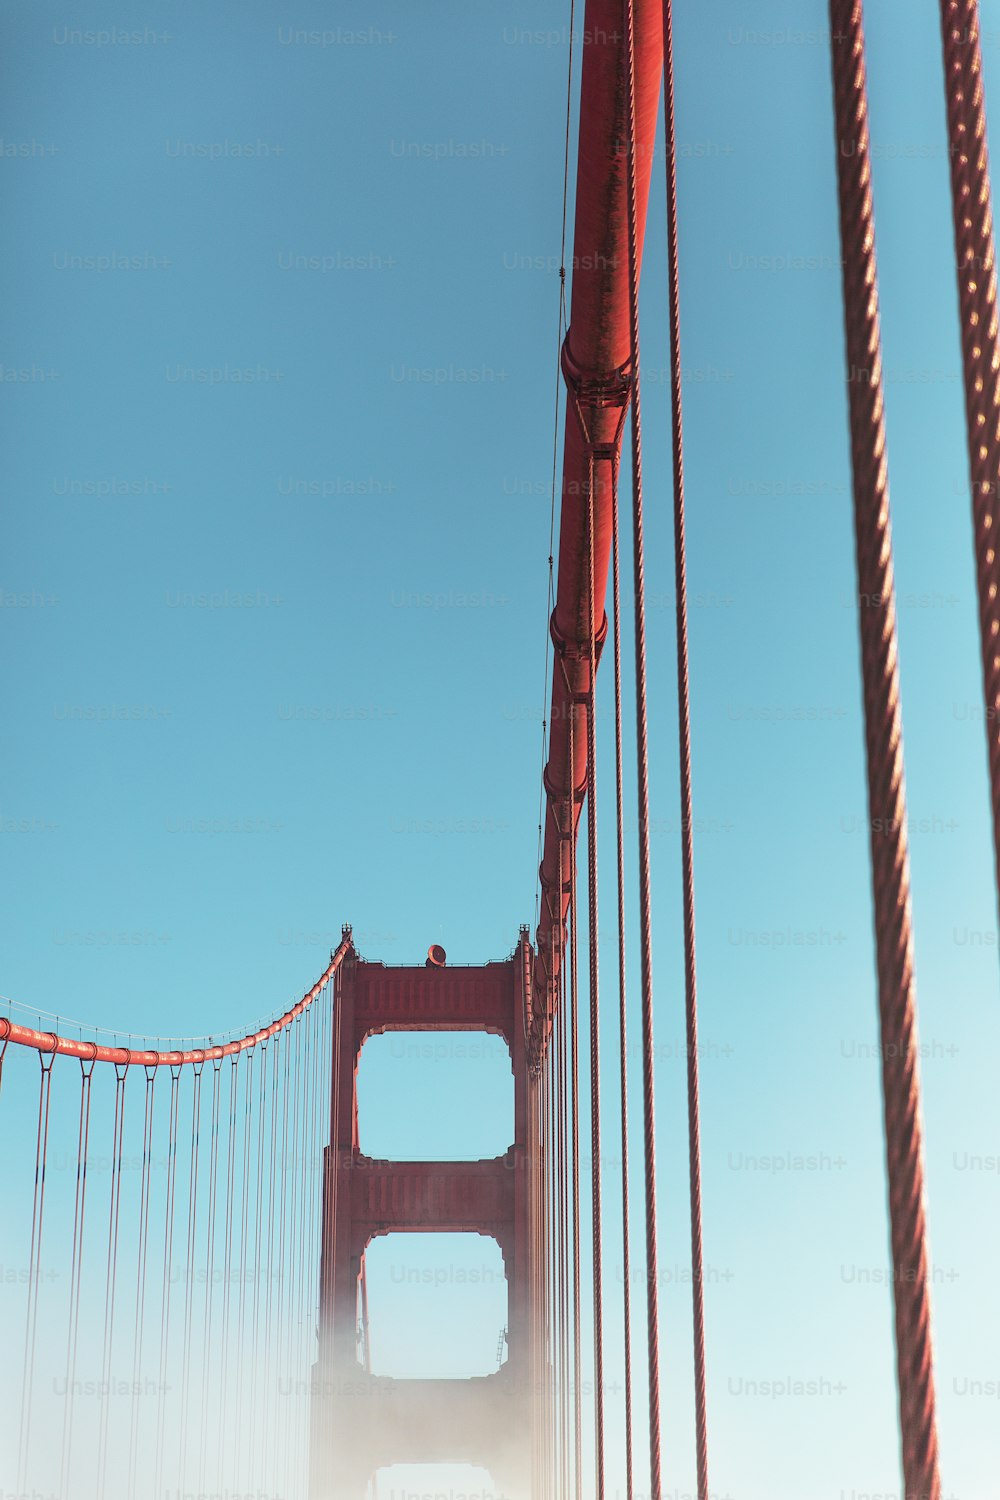 a view of the golden gate bridge from below